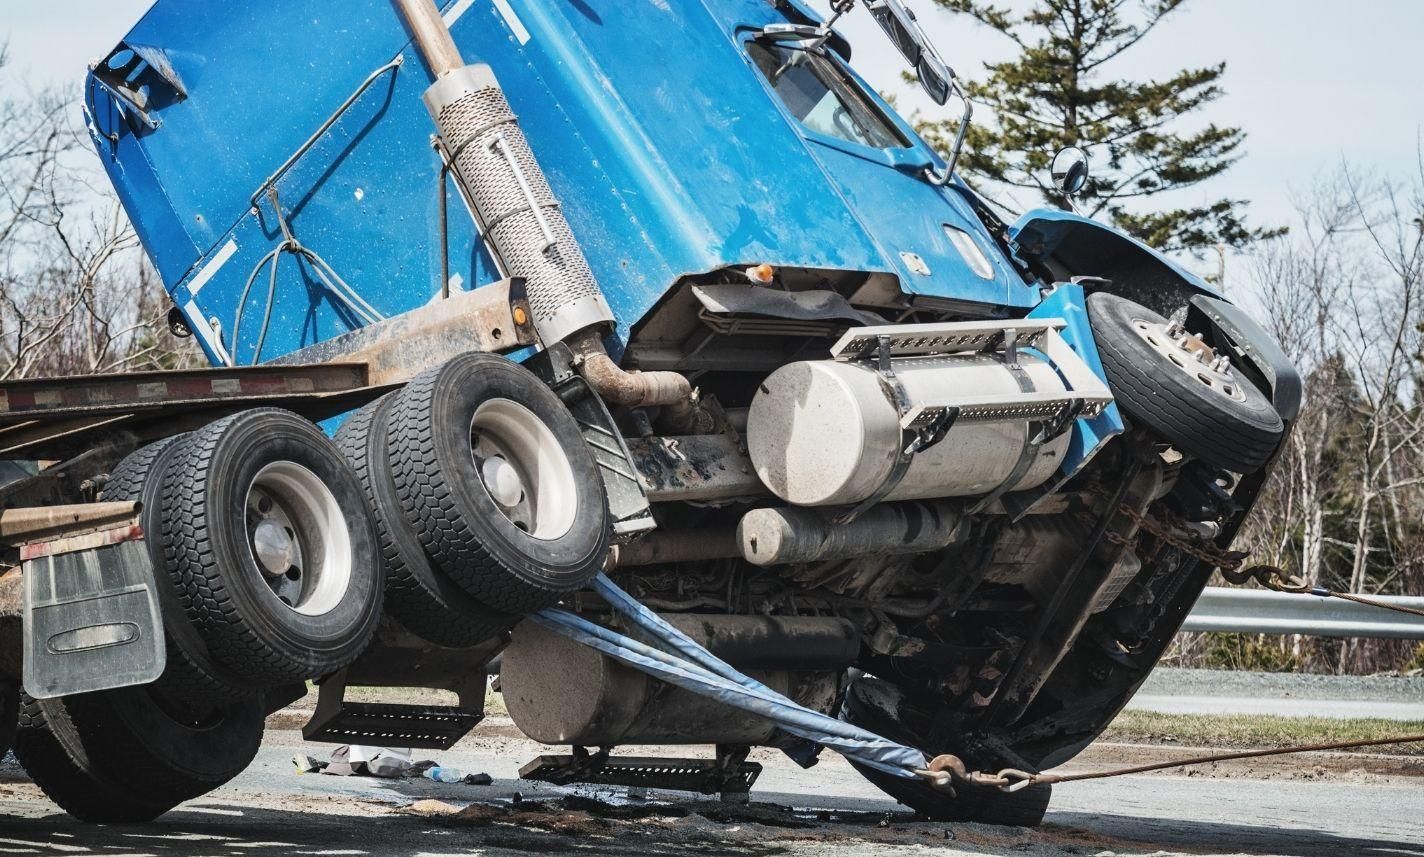 jackson-commercial-truck-accident-injury-lawyer